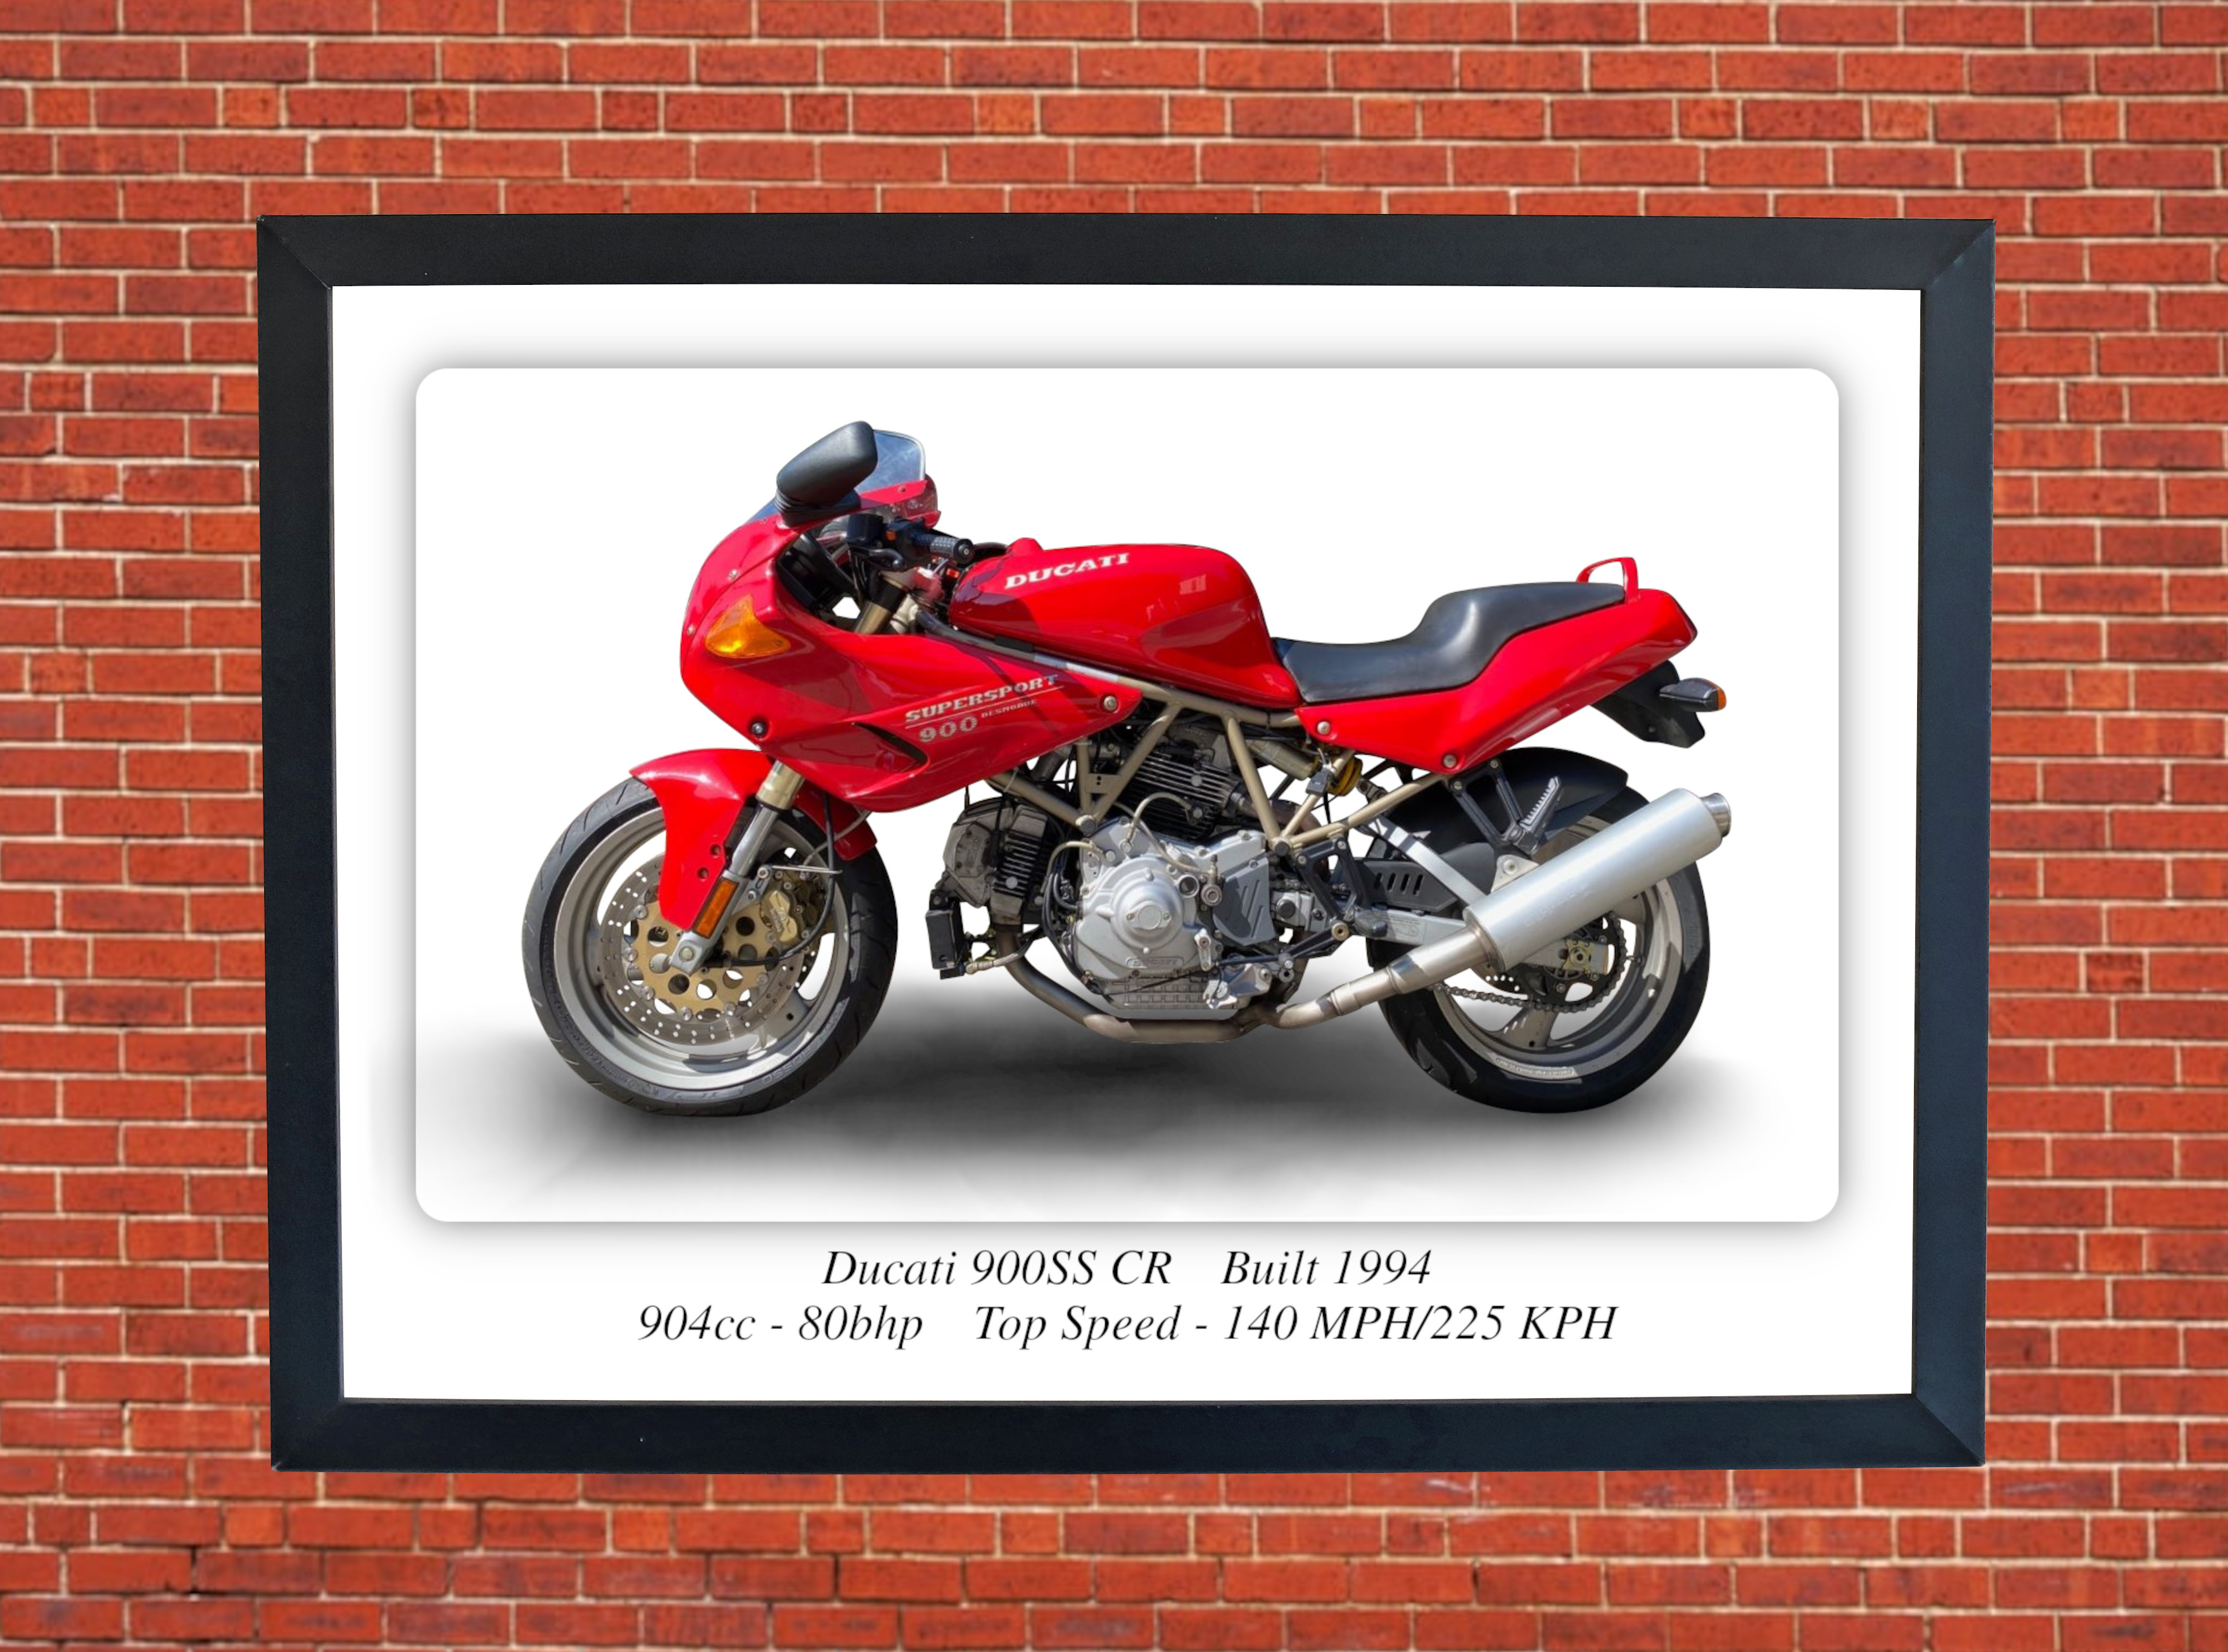 Ducati 900SS CR Motorbike Motorcycle - A3/A4 Size Print Poster